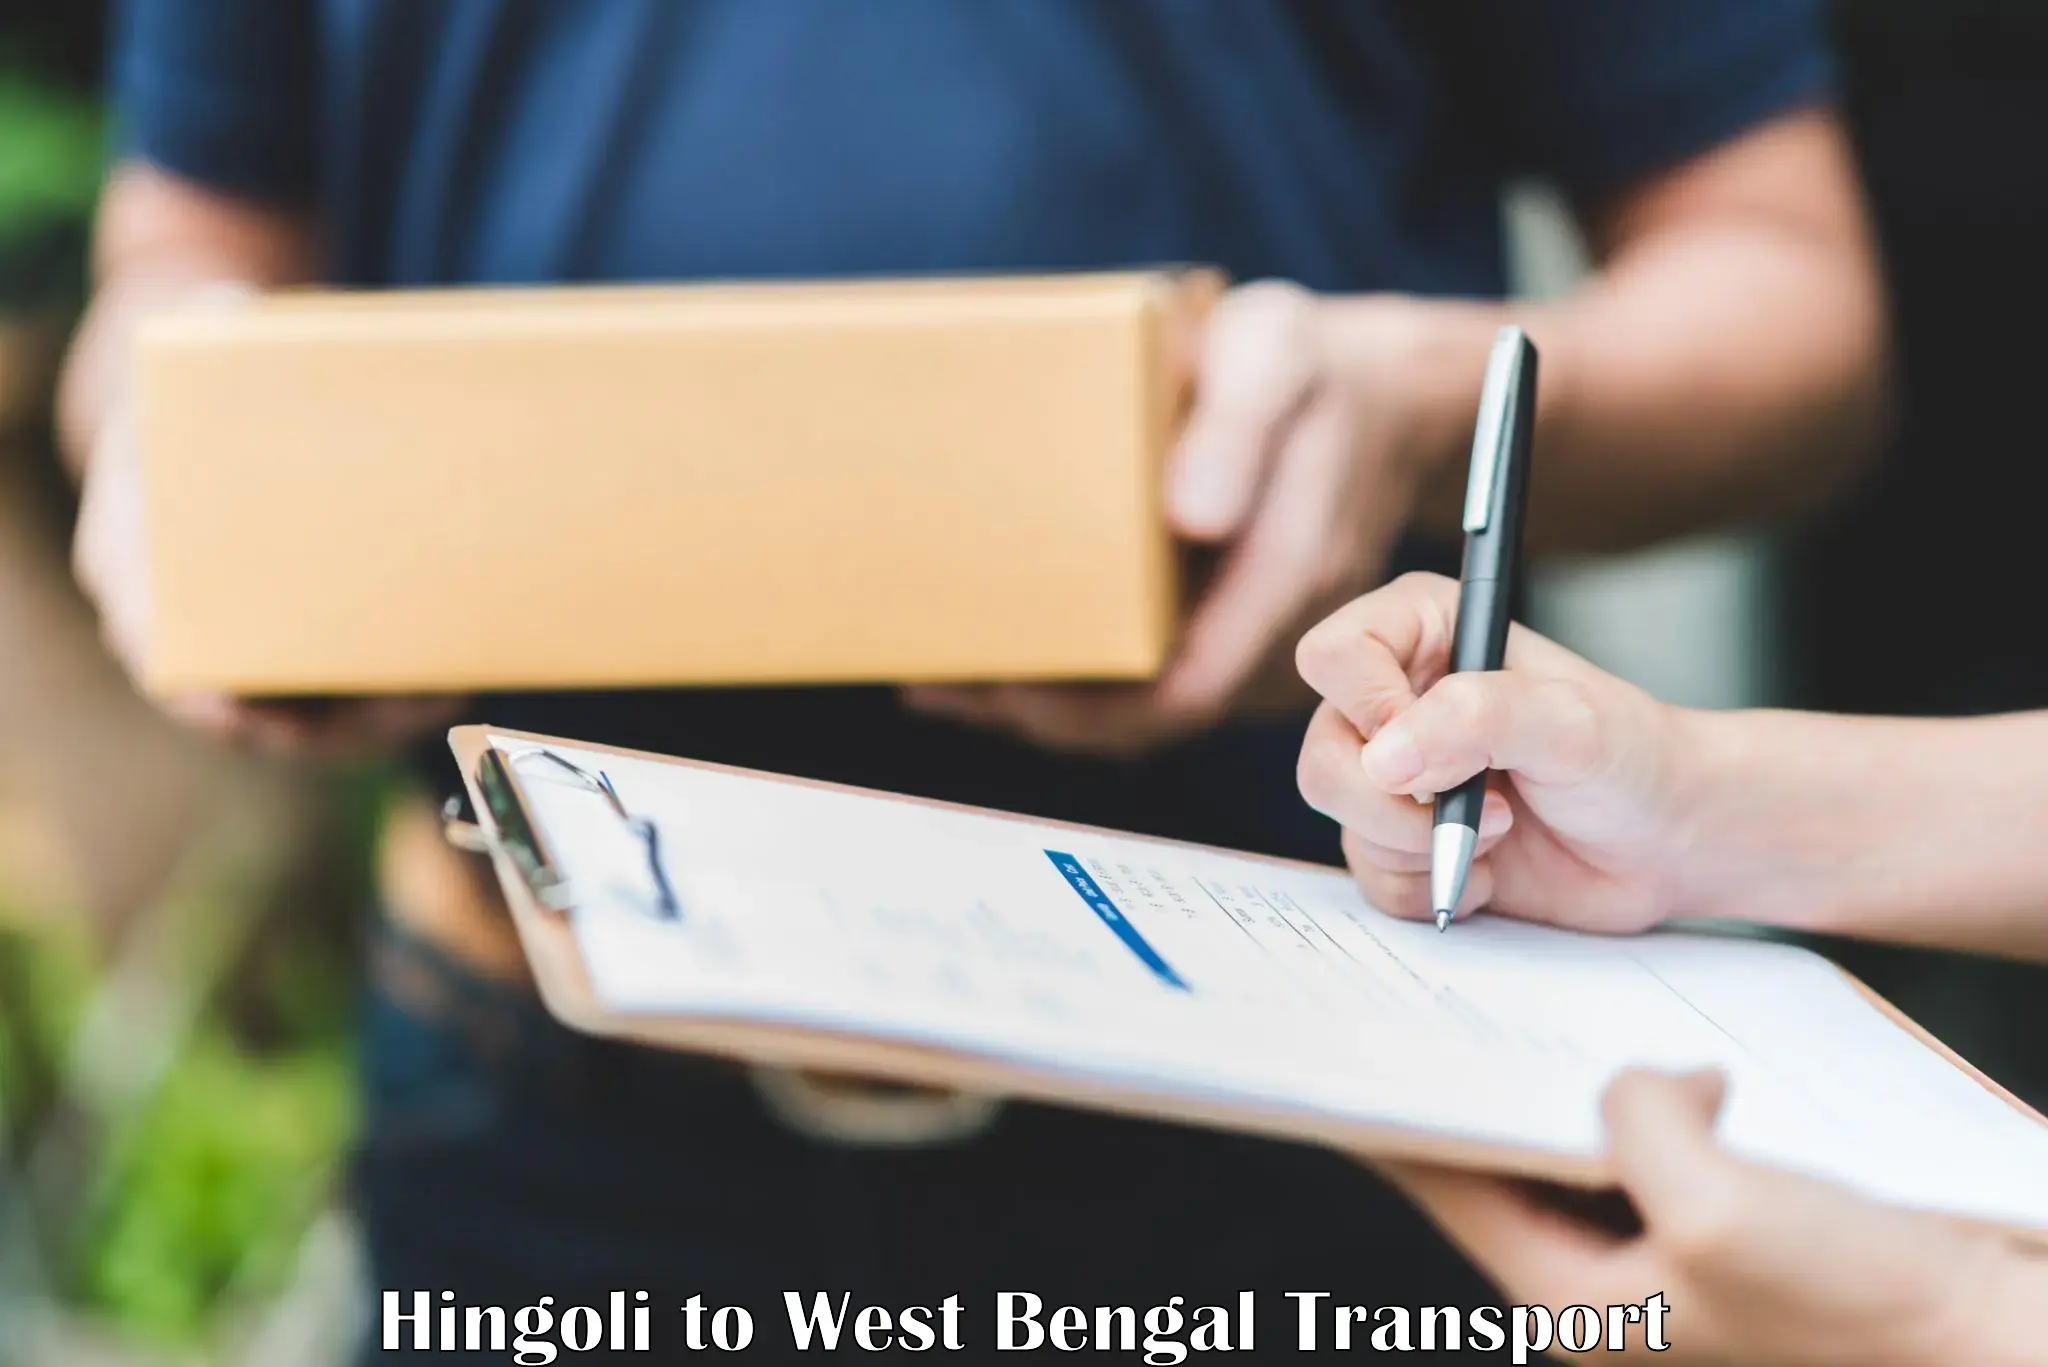 Cycle transportation service Hingoli to West Bengal